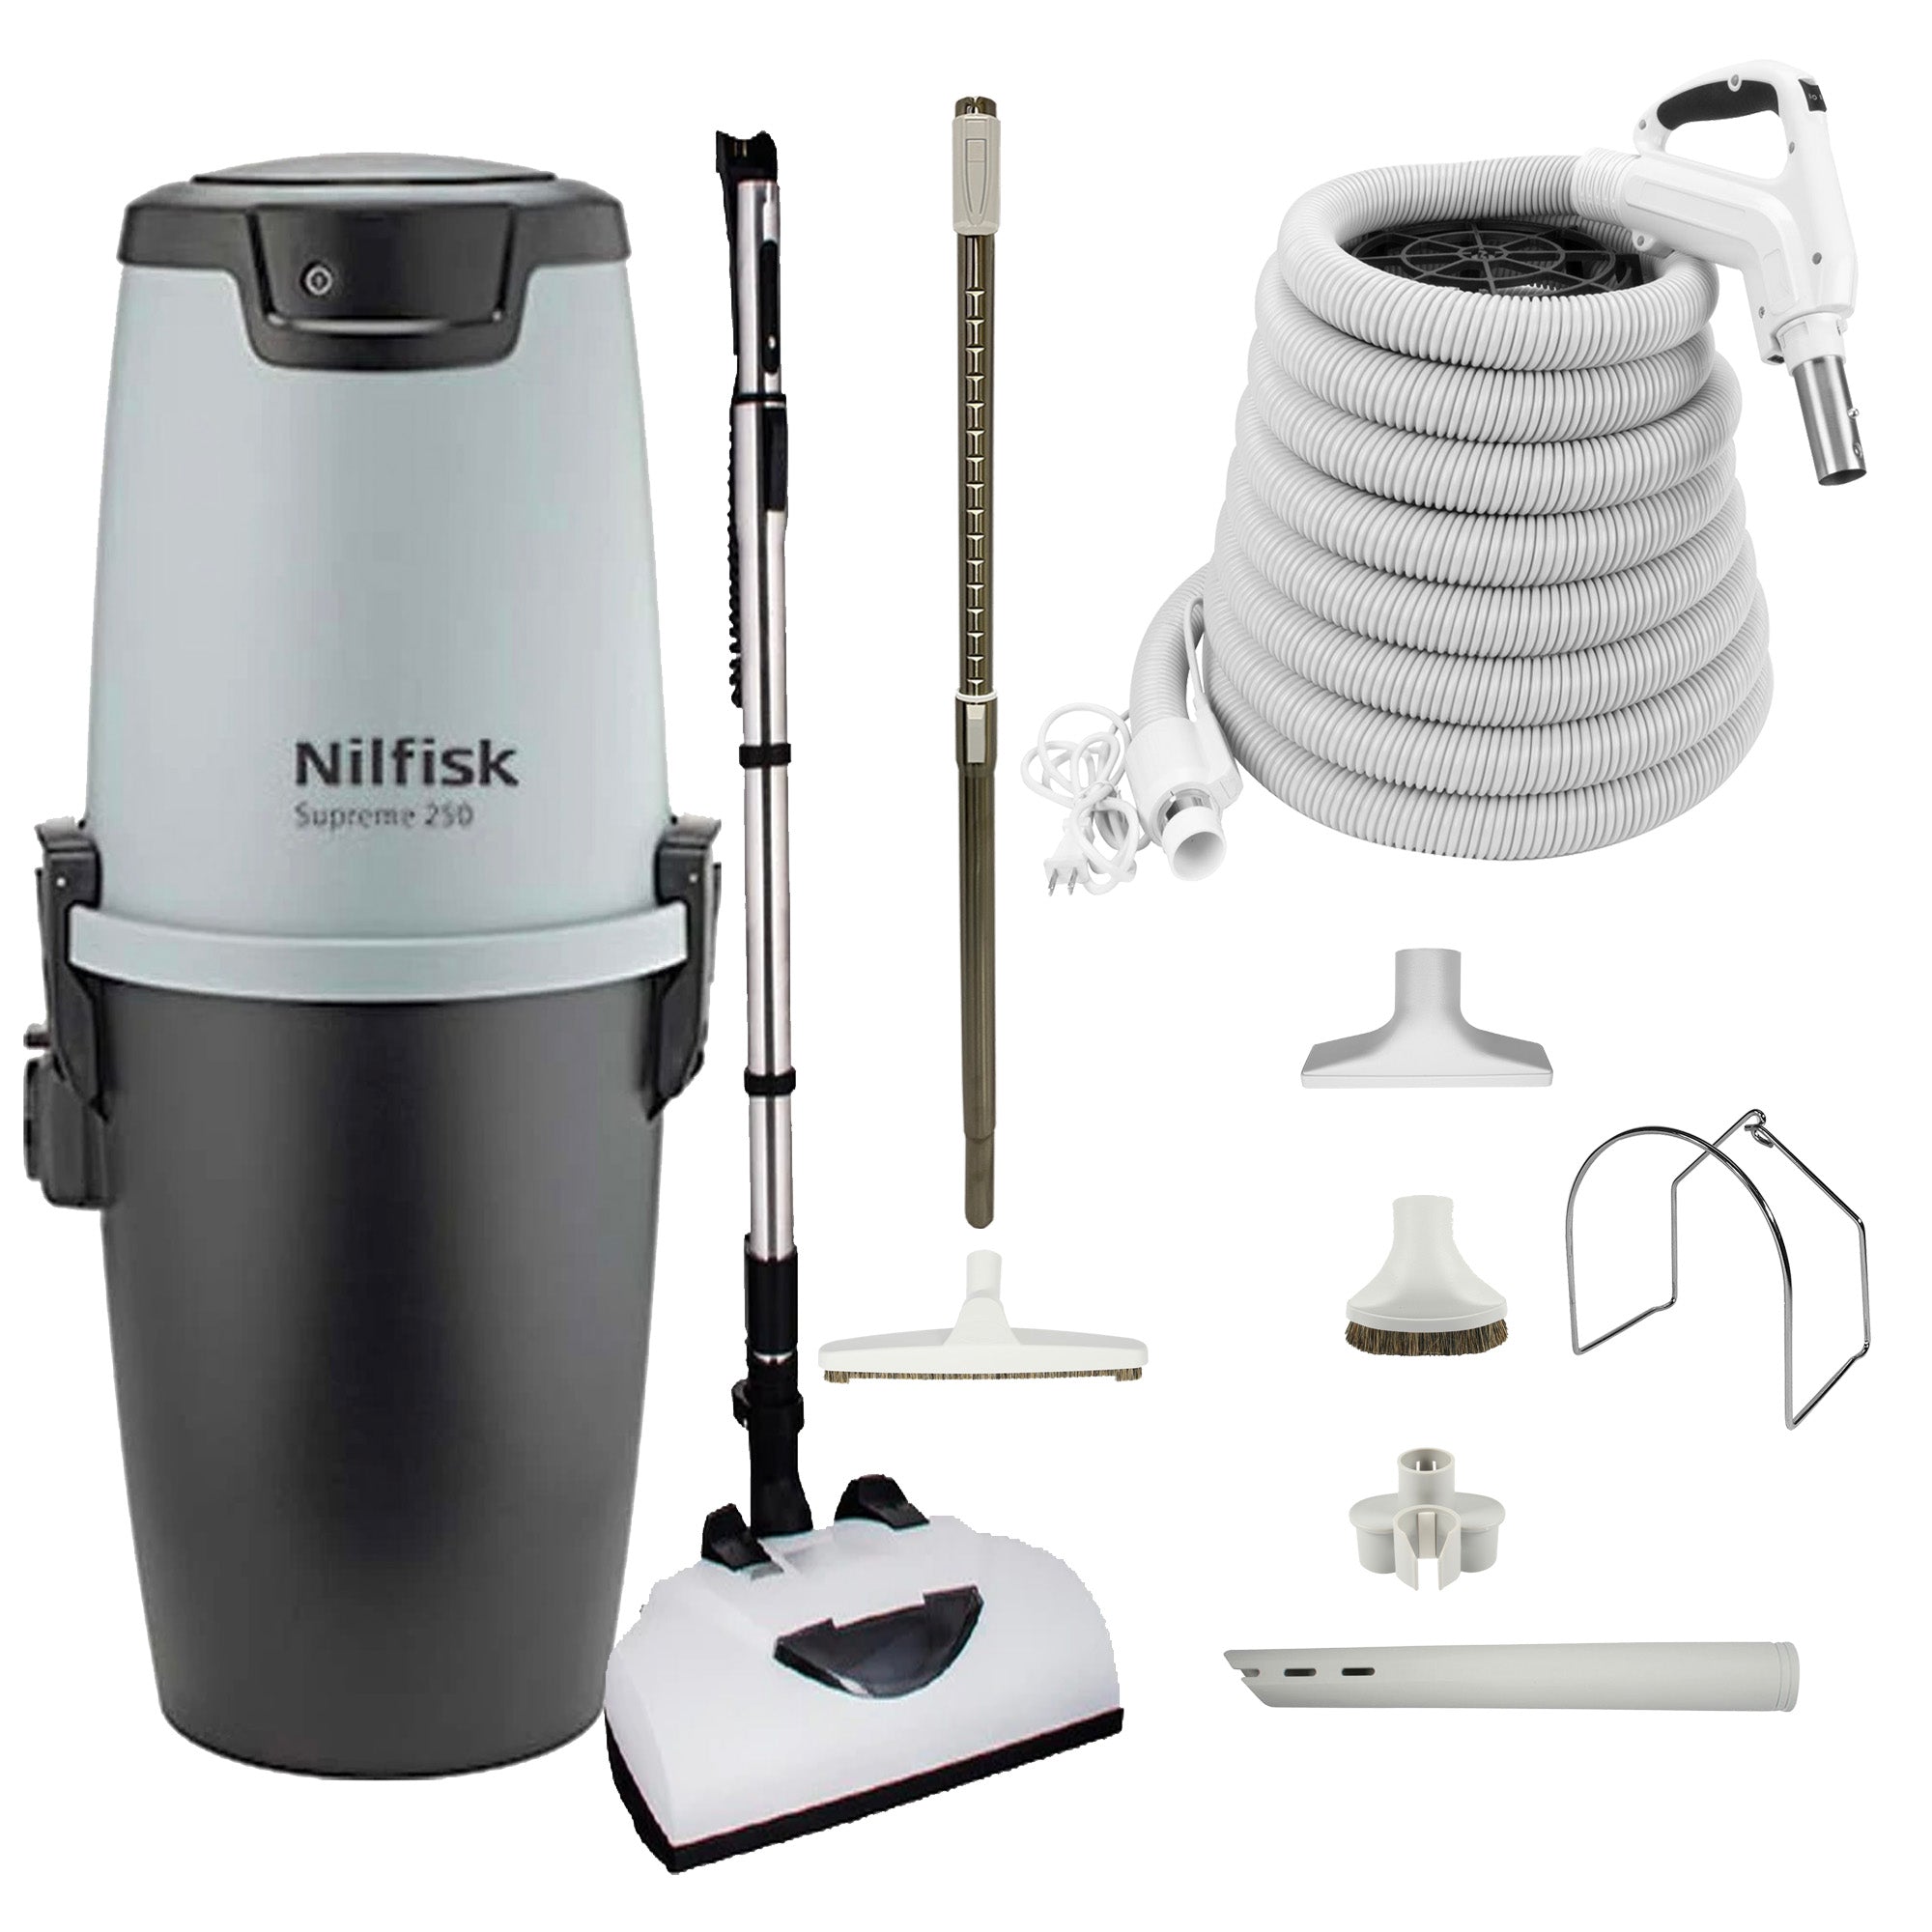 Nilfisk Supreme 250 Central Vacuum with Deluxe Electric Package - White